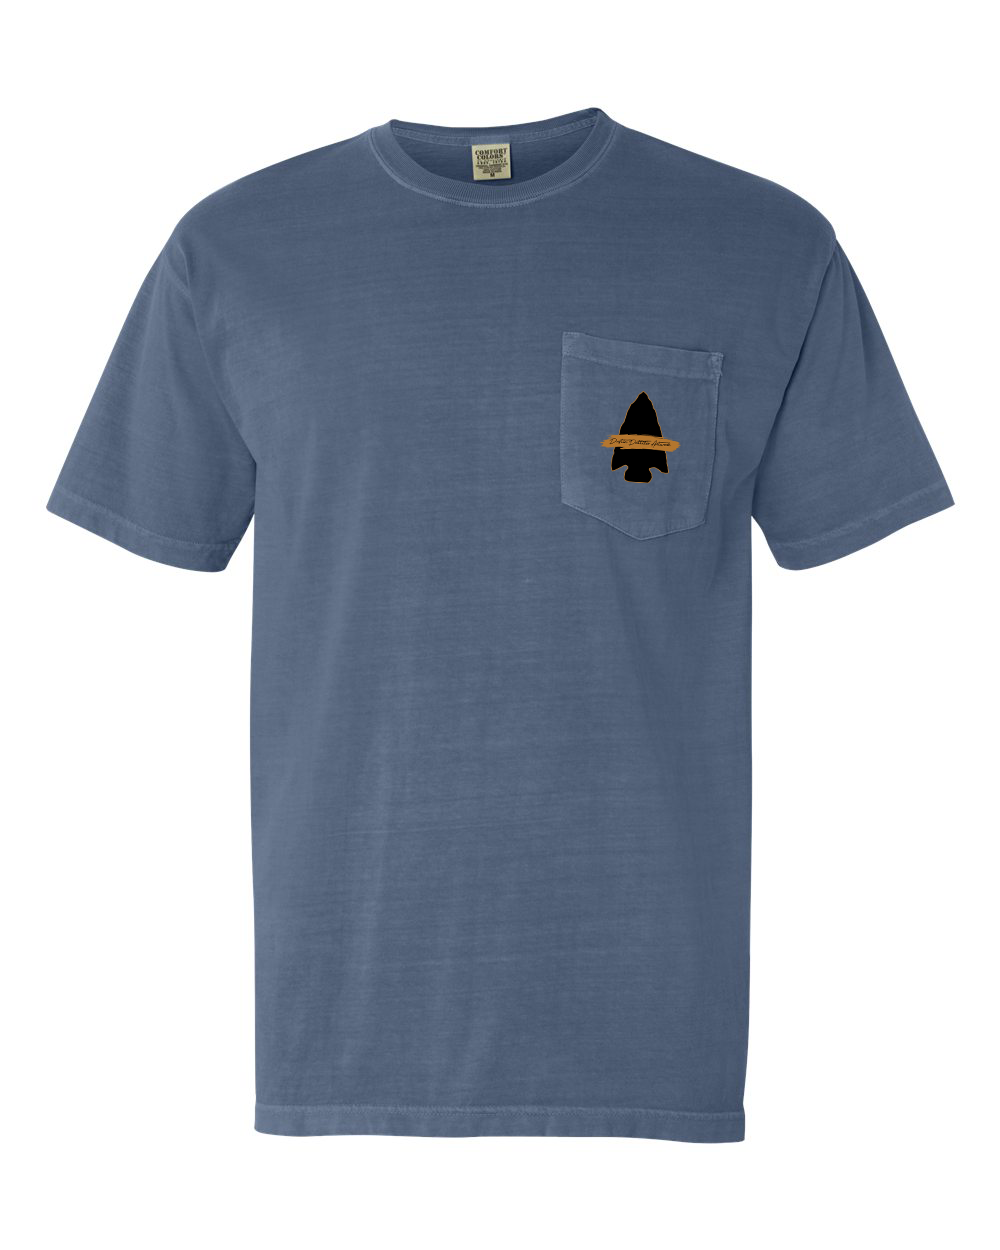 From The Shadows - Comfort Colors Pocket Tee